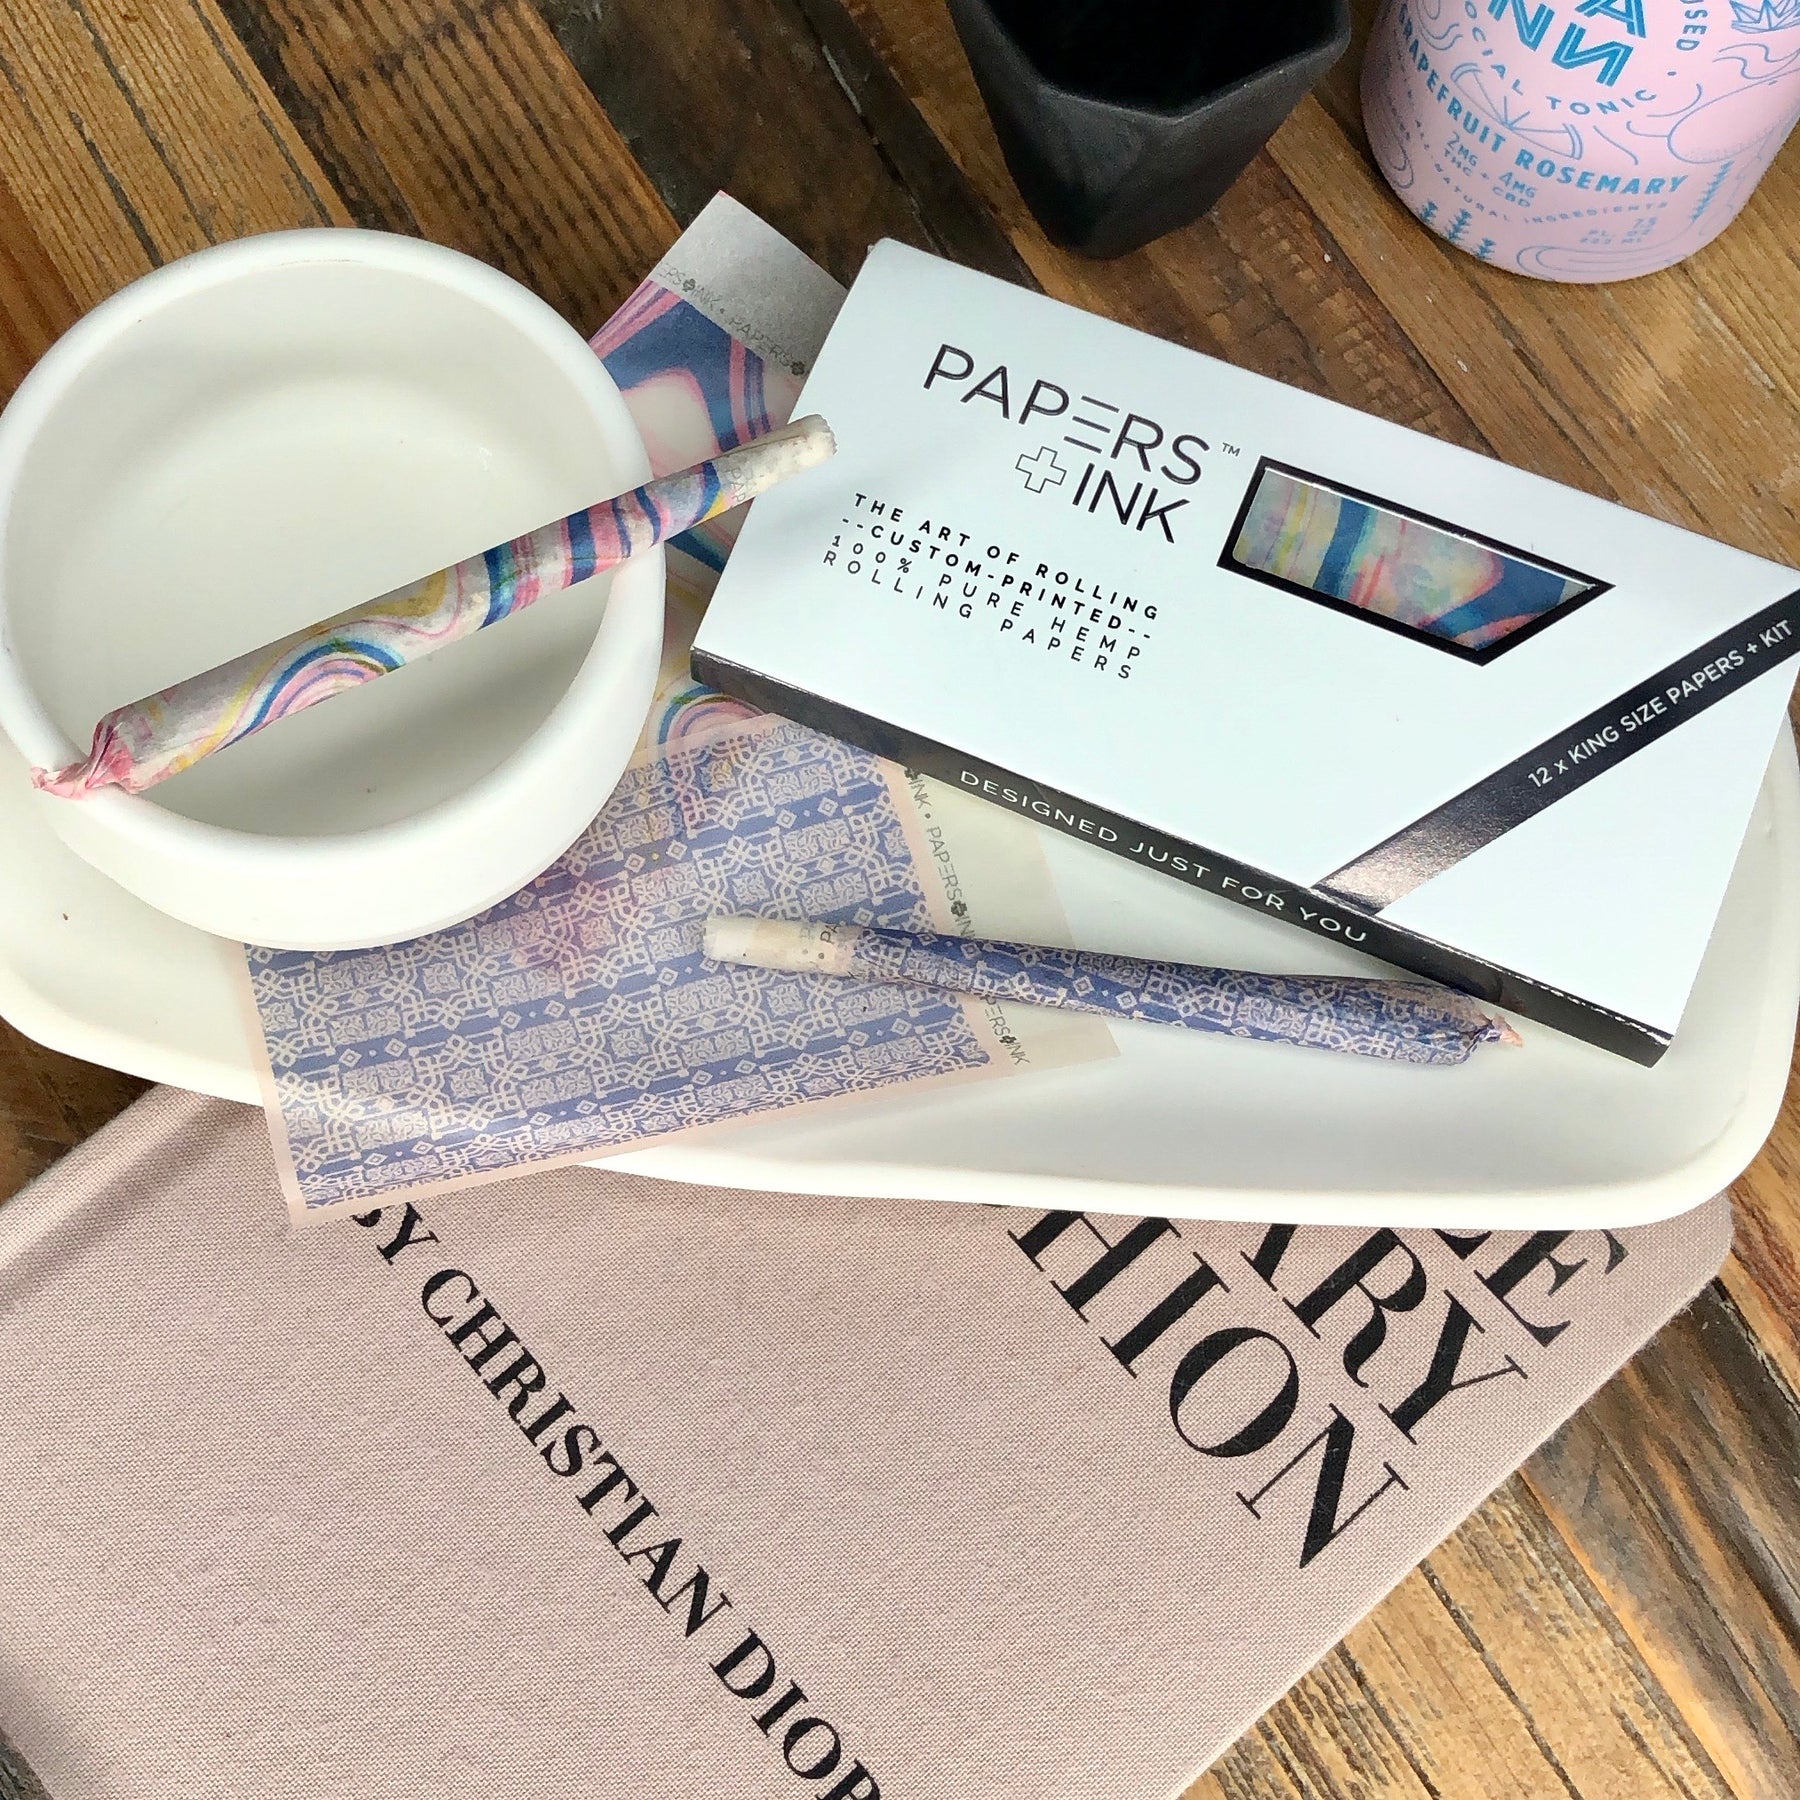 Papers + Ink  organic custom printed rolling papers - GUCCI SWIRLS